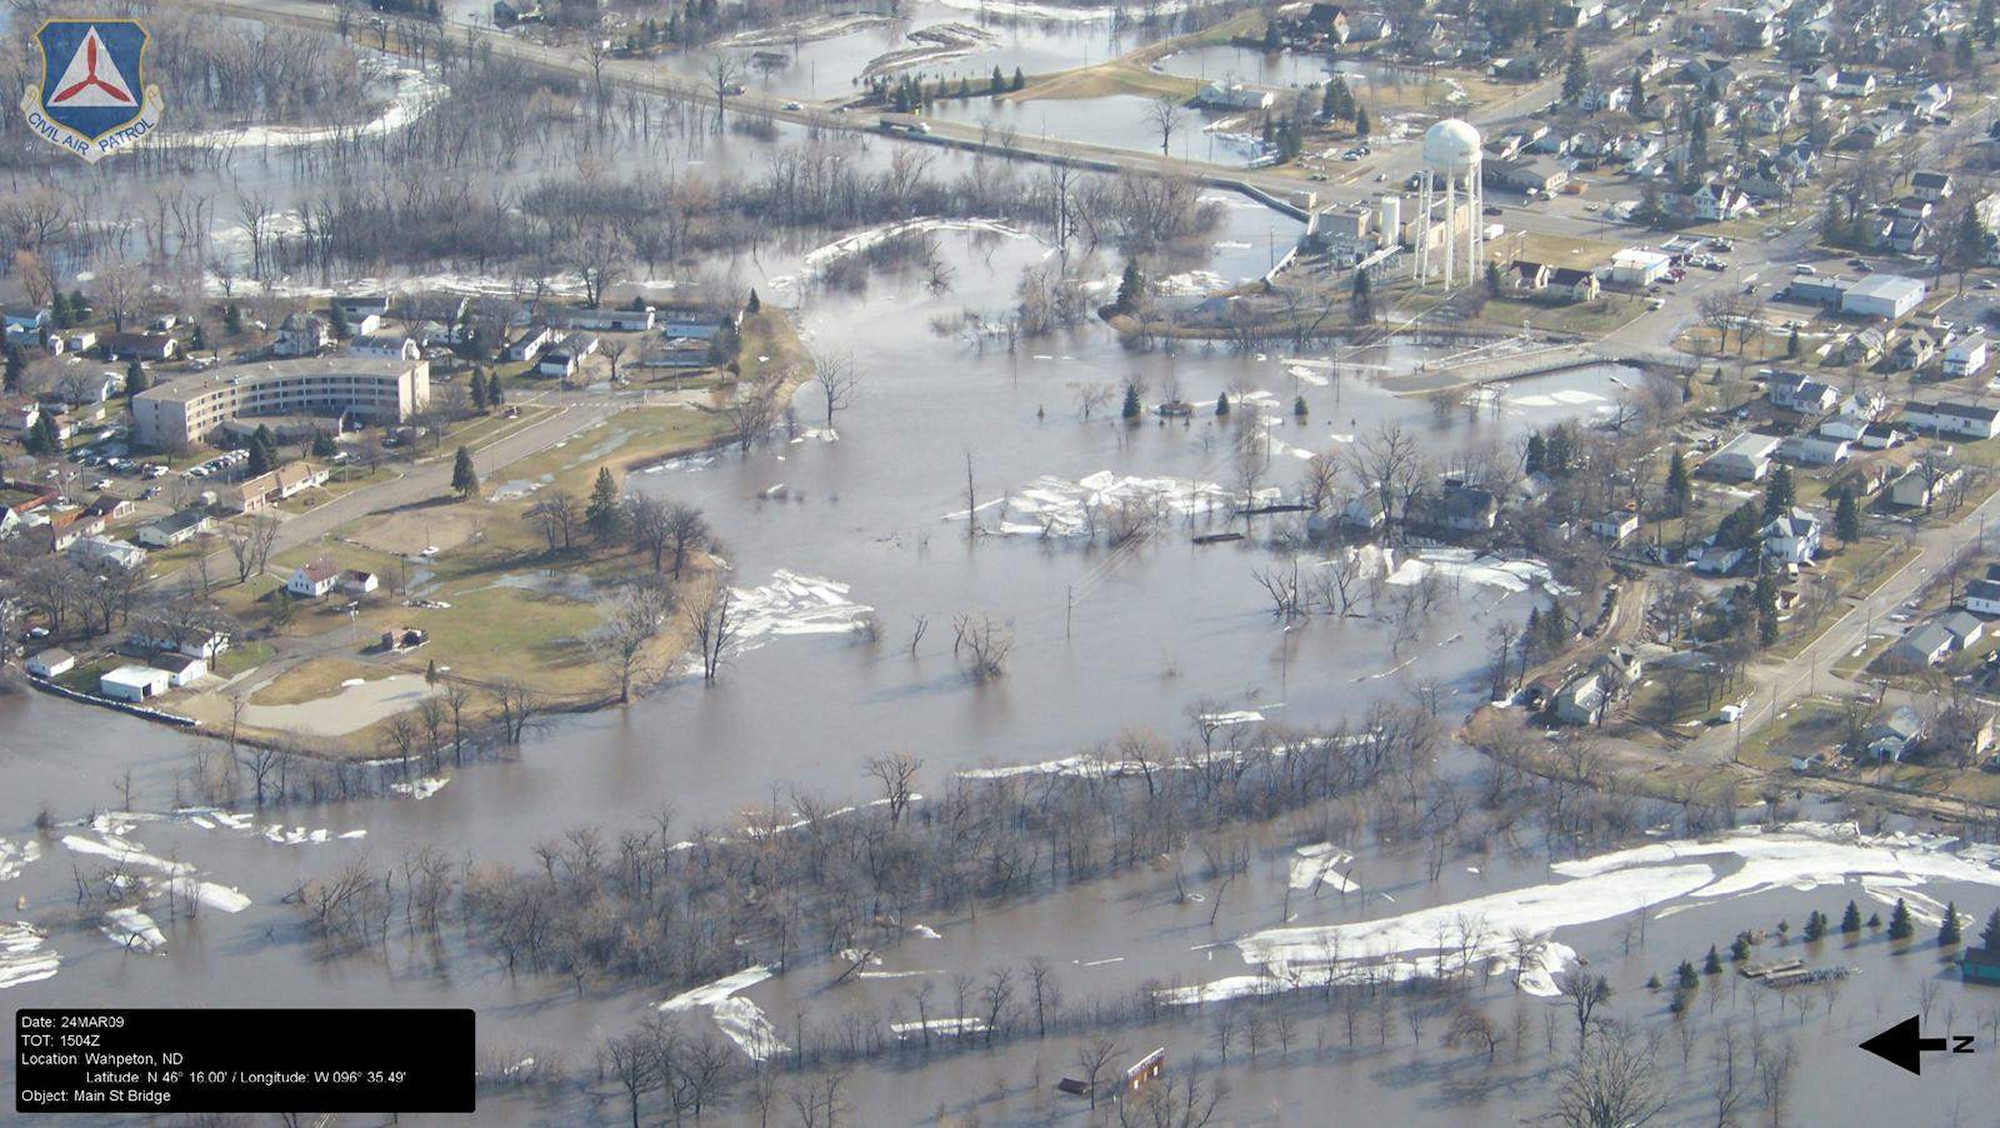 This visual image from Air Force Auxiliary officials show damage done by flood waters along the Red River in North Dakota. Air Force Auxiliary officials have flown more than 30 sorties and captured hundreds of visual images to give emergency responders and on-scene commanders the most up-to-date picture of the affected areas. (U.S. Air Force photo)